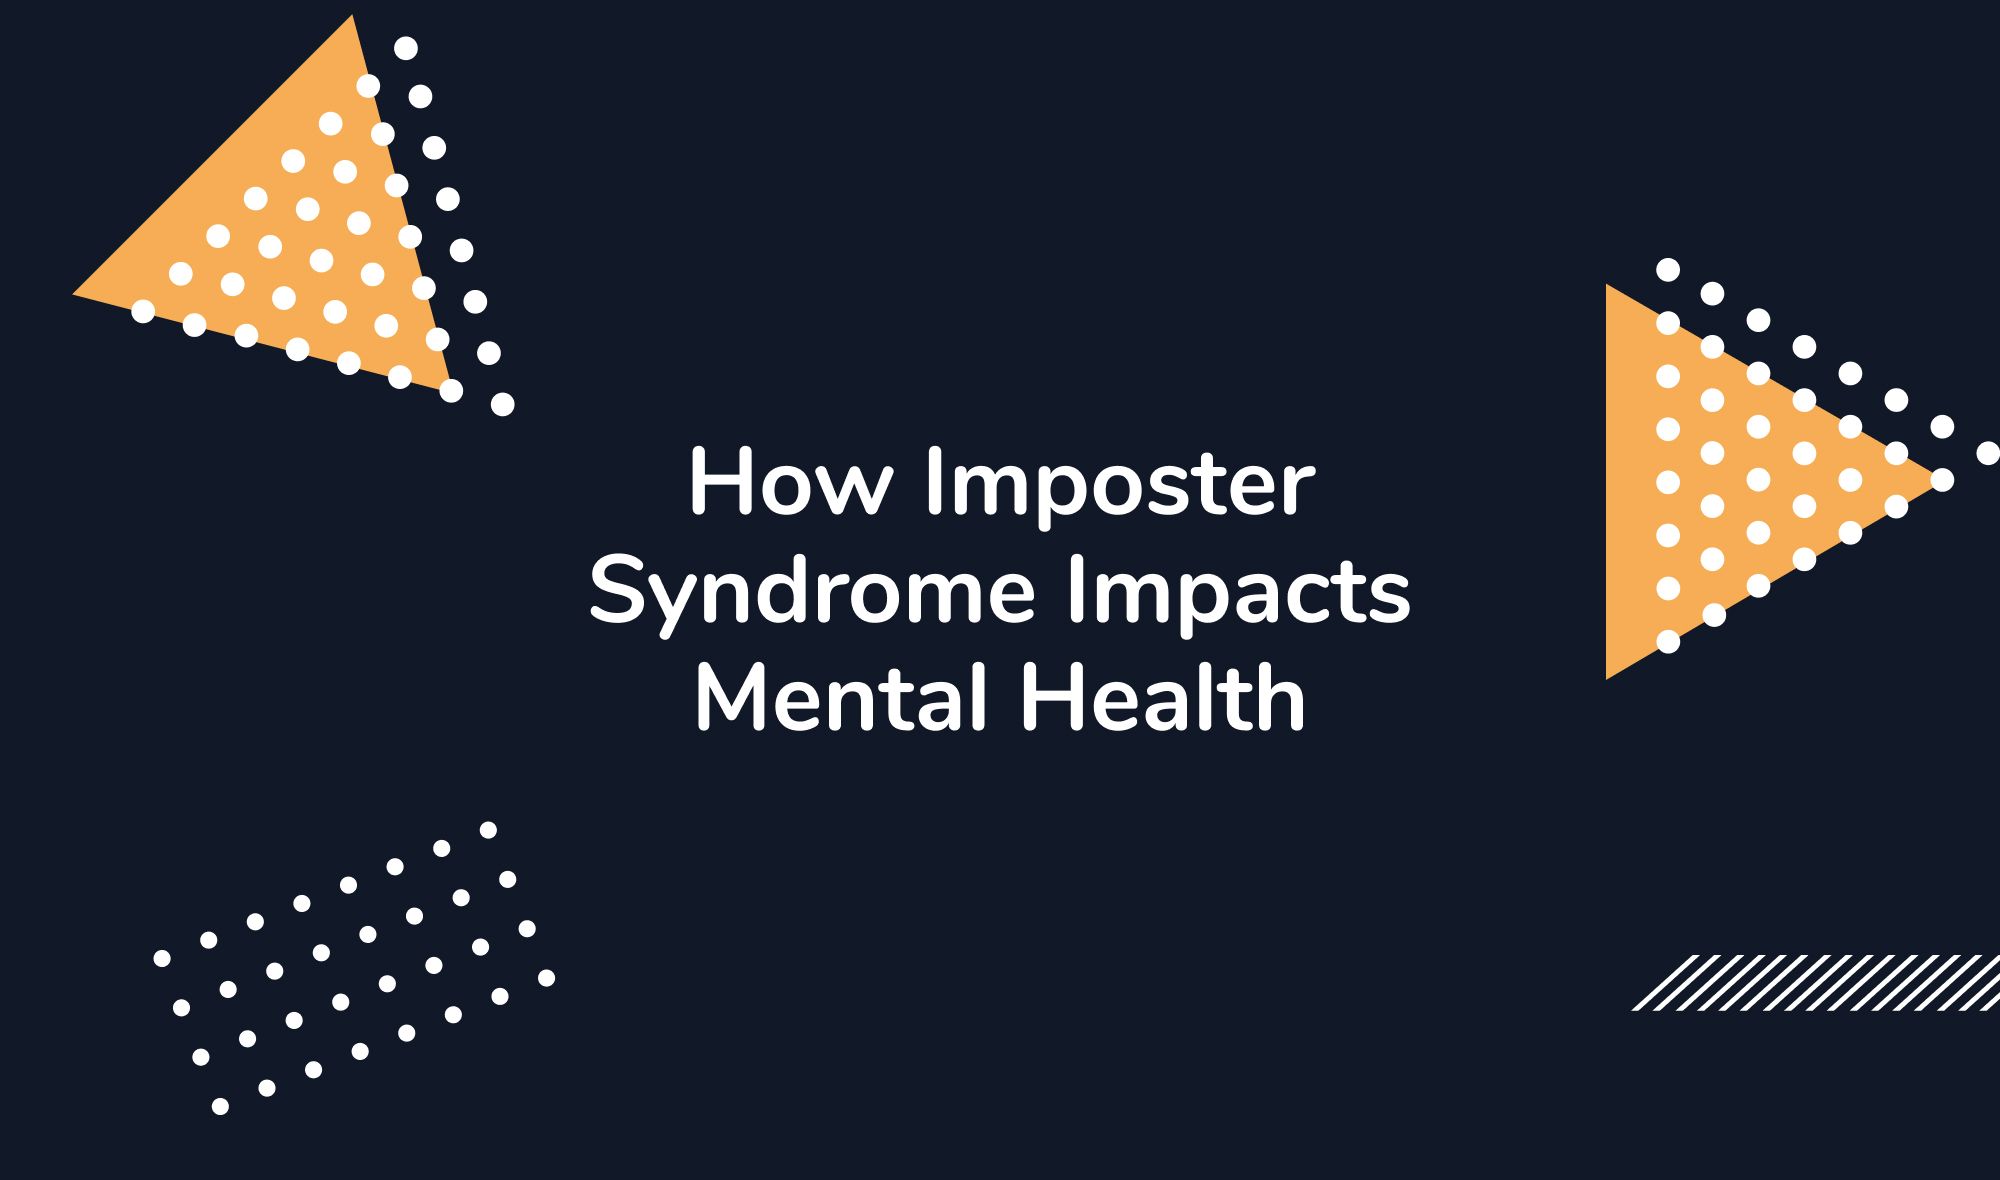 How Imposter Syndrome Impacts Mental Health